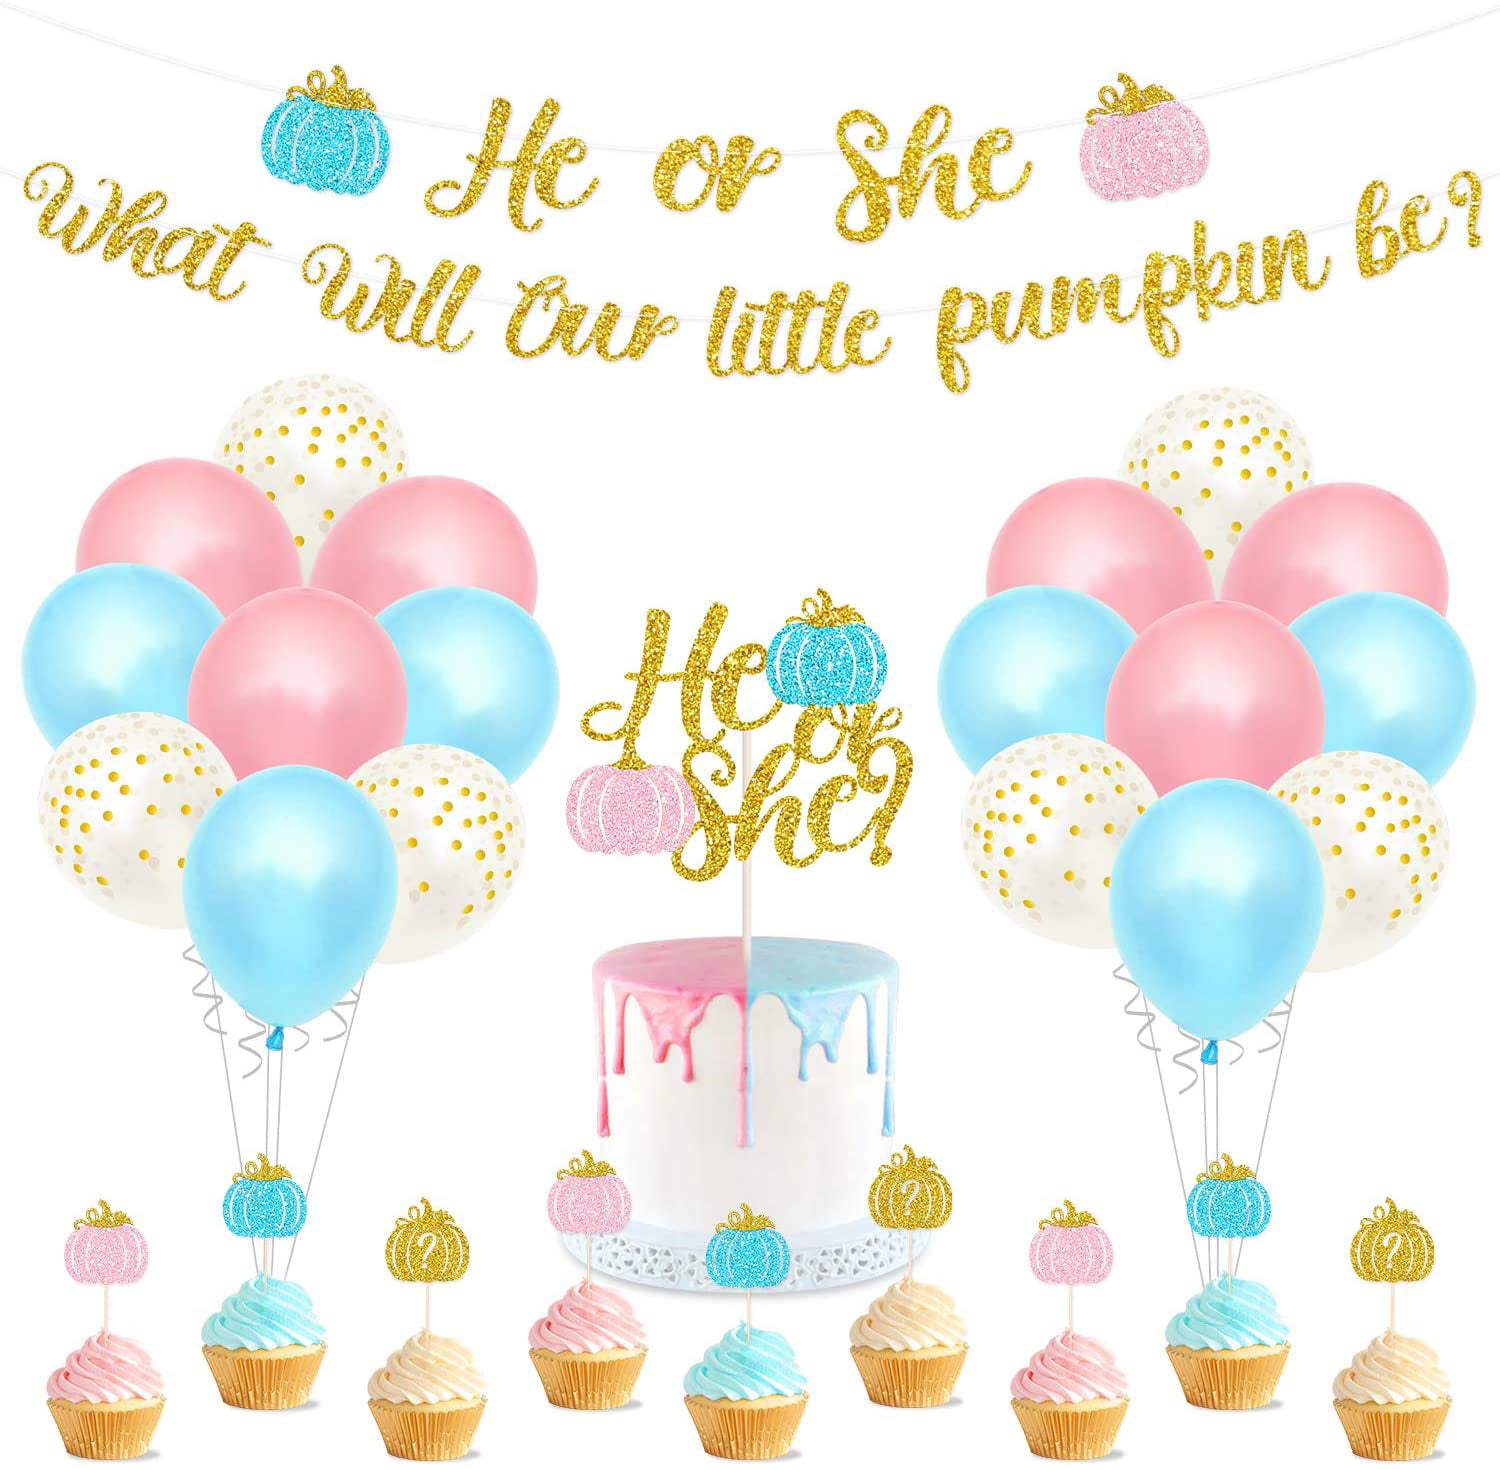 Pumpkin Gender Reveal Backdrop Rustic Wood Blue or Pink Watercolor Pumpkin Gender Reveal Baby Shower Photo Background Boy or Girl Announce Pregnancy Party Decorations Banner Photo Booth Props 7x5ft V 